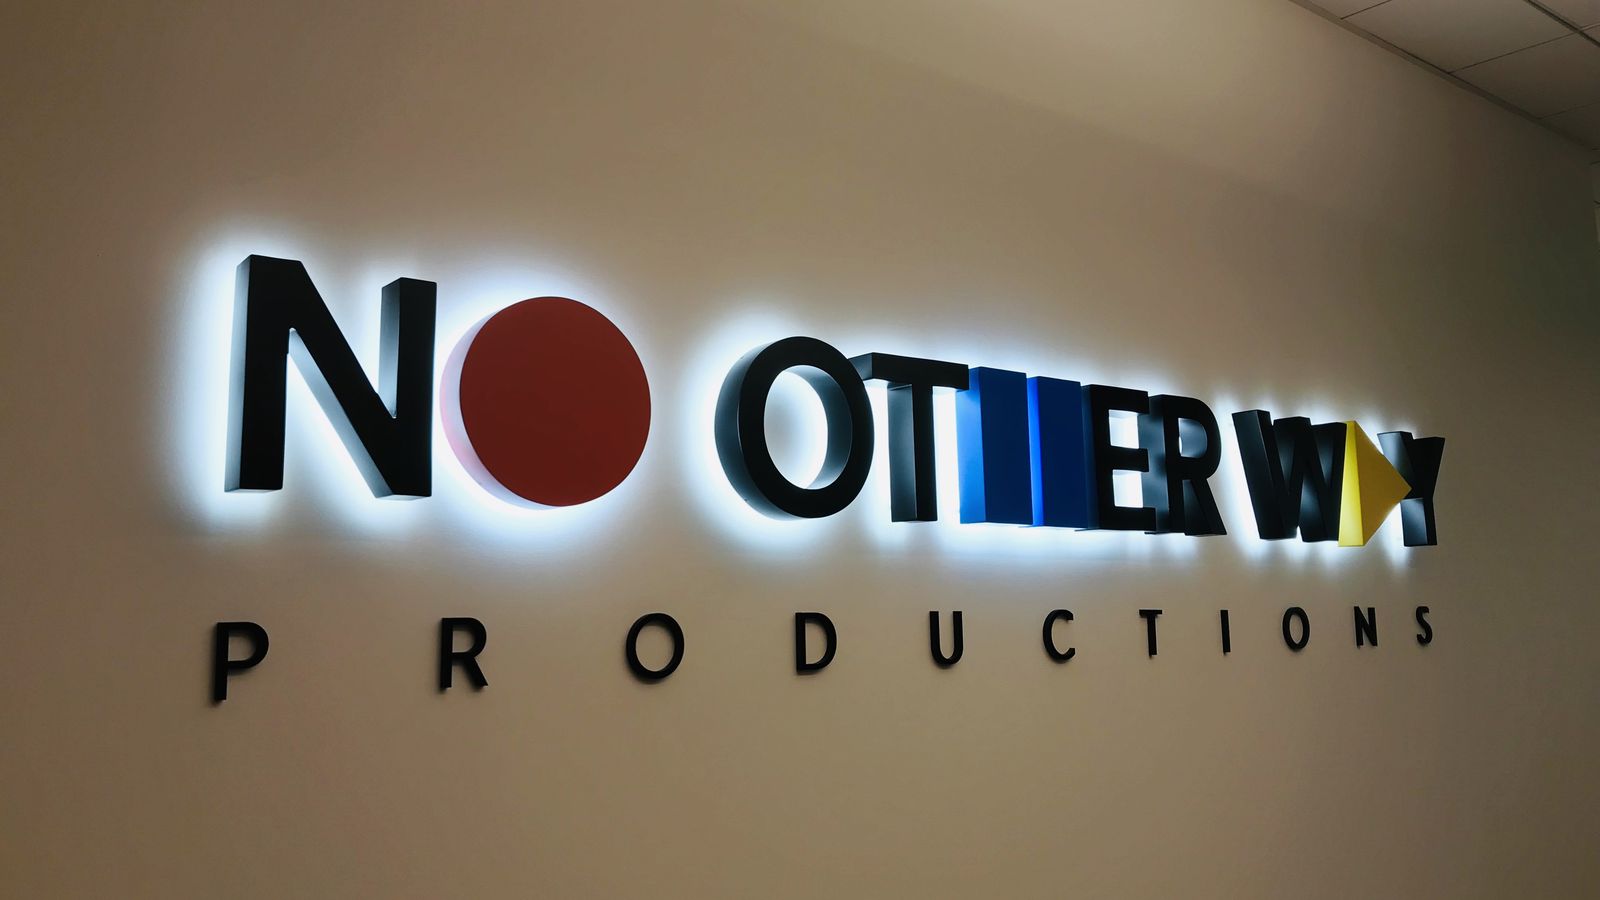 no other way productions interior letters